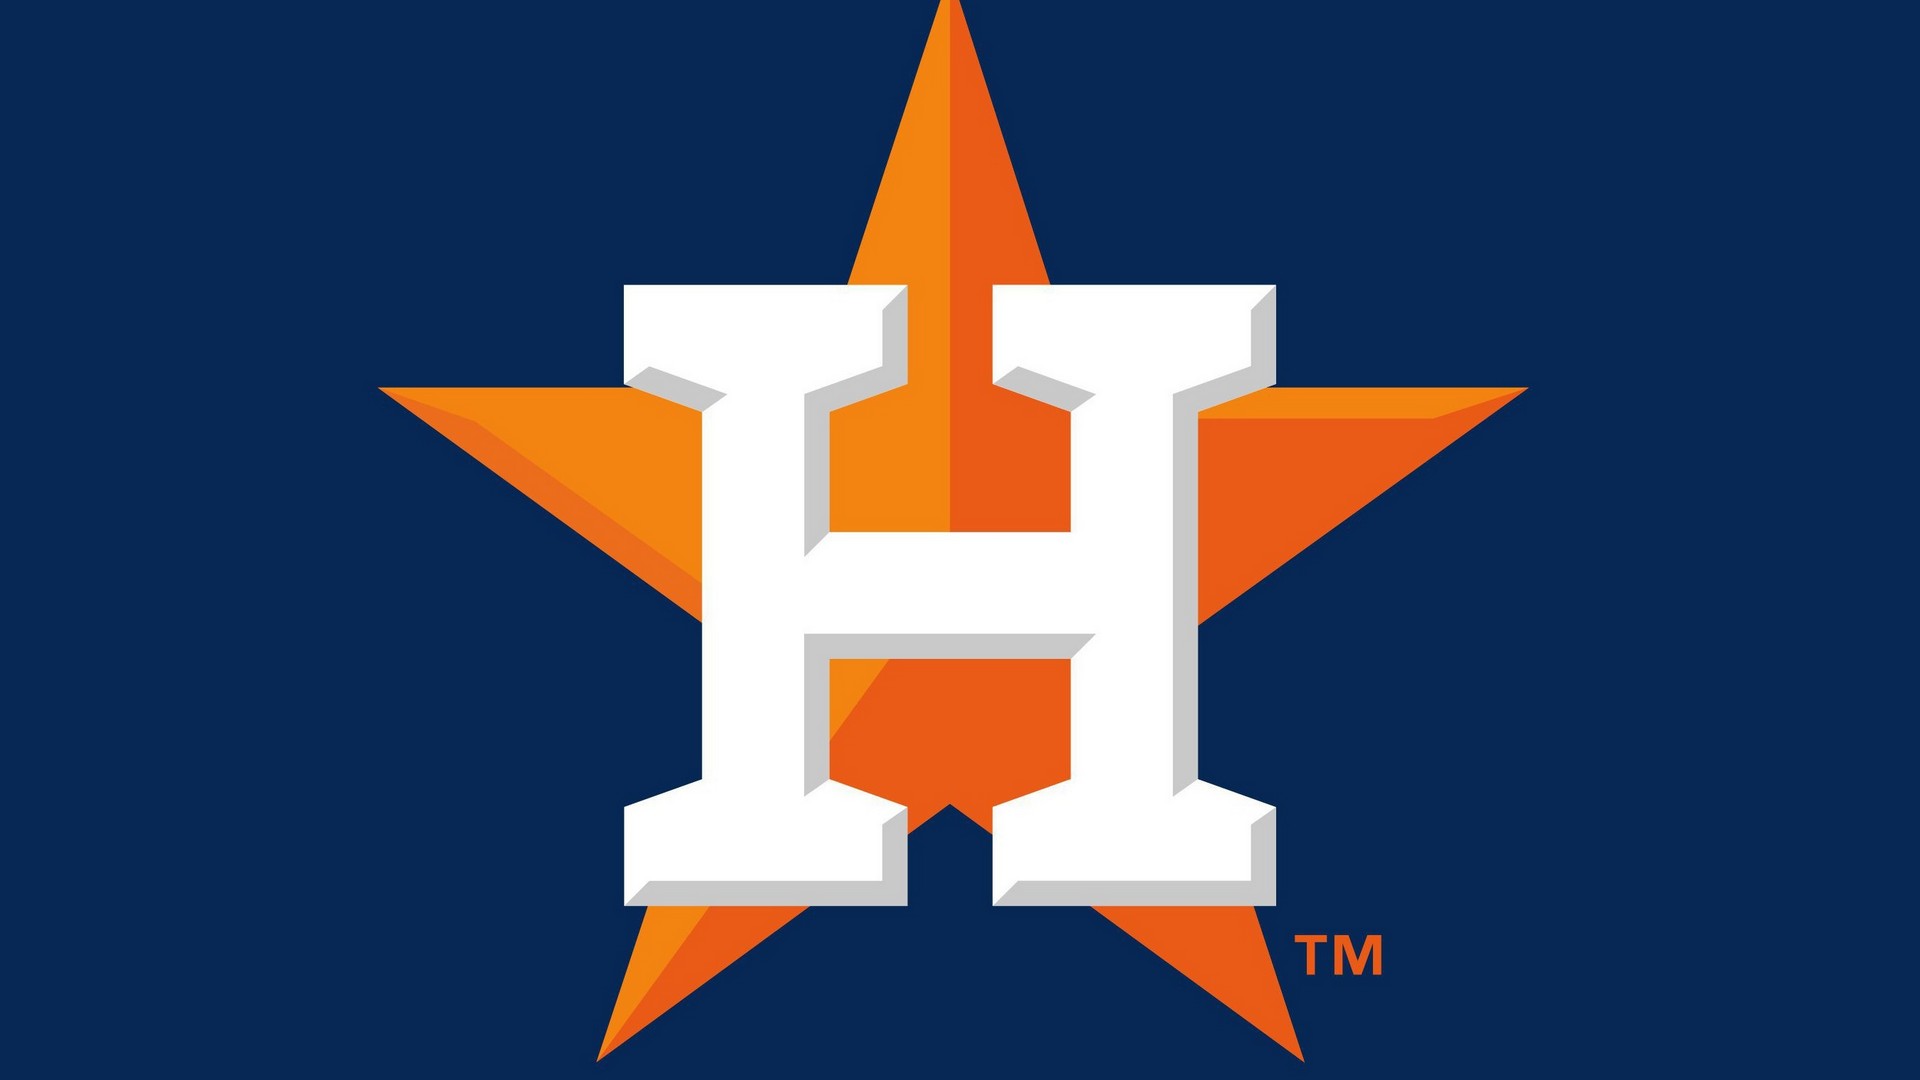 HD Desktop Wallpaper Houston Astros With high-resolution 1920X1080 pixel. You can use this wallpaper for Mac Desktop Wallpaper, Laptop Screensavers, Android Wallpapers, Tablet or iPhone Home Screen and another mobile phone device